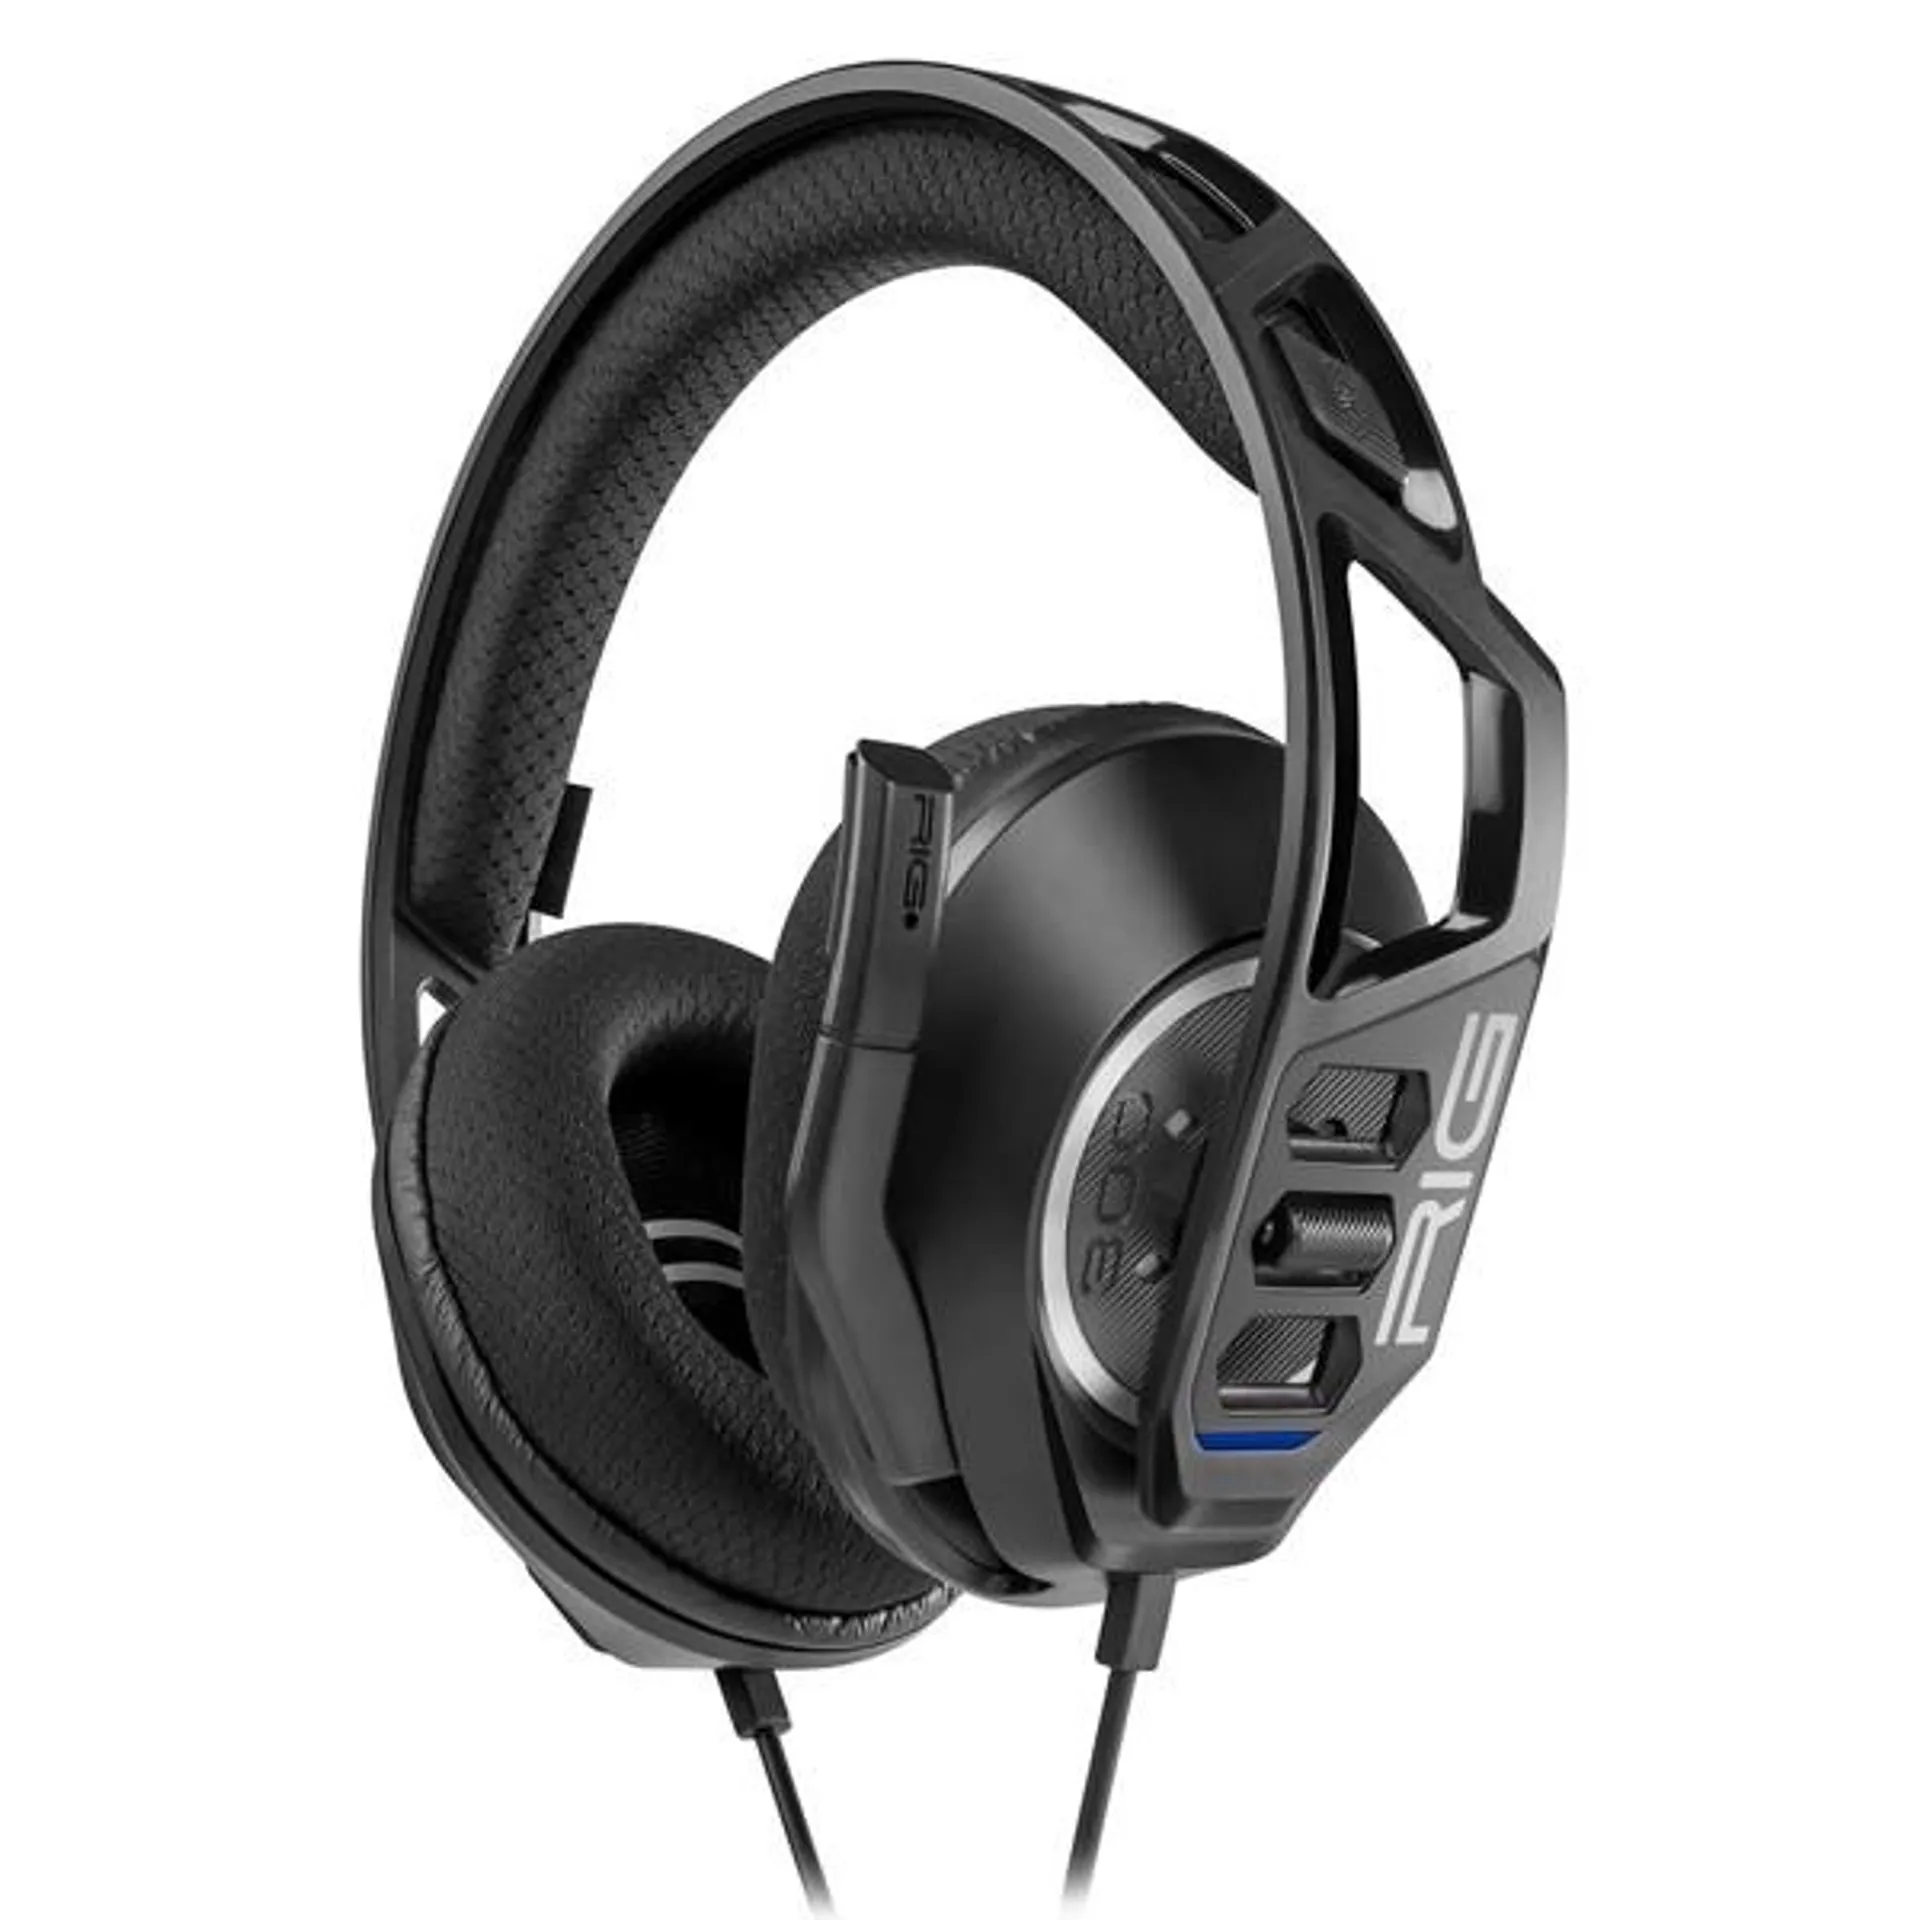 RIG 300 Pro HS Gaming Headset for PlayStation - Black